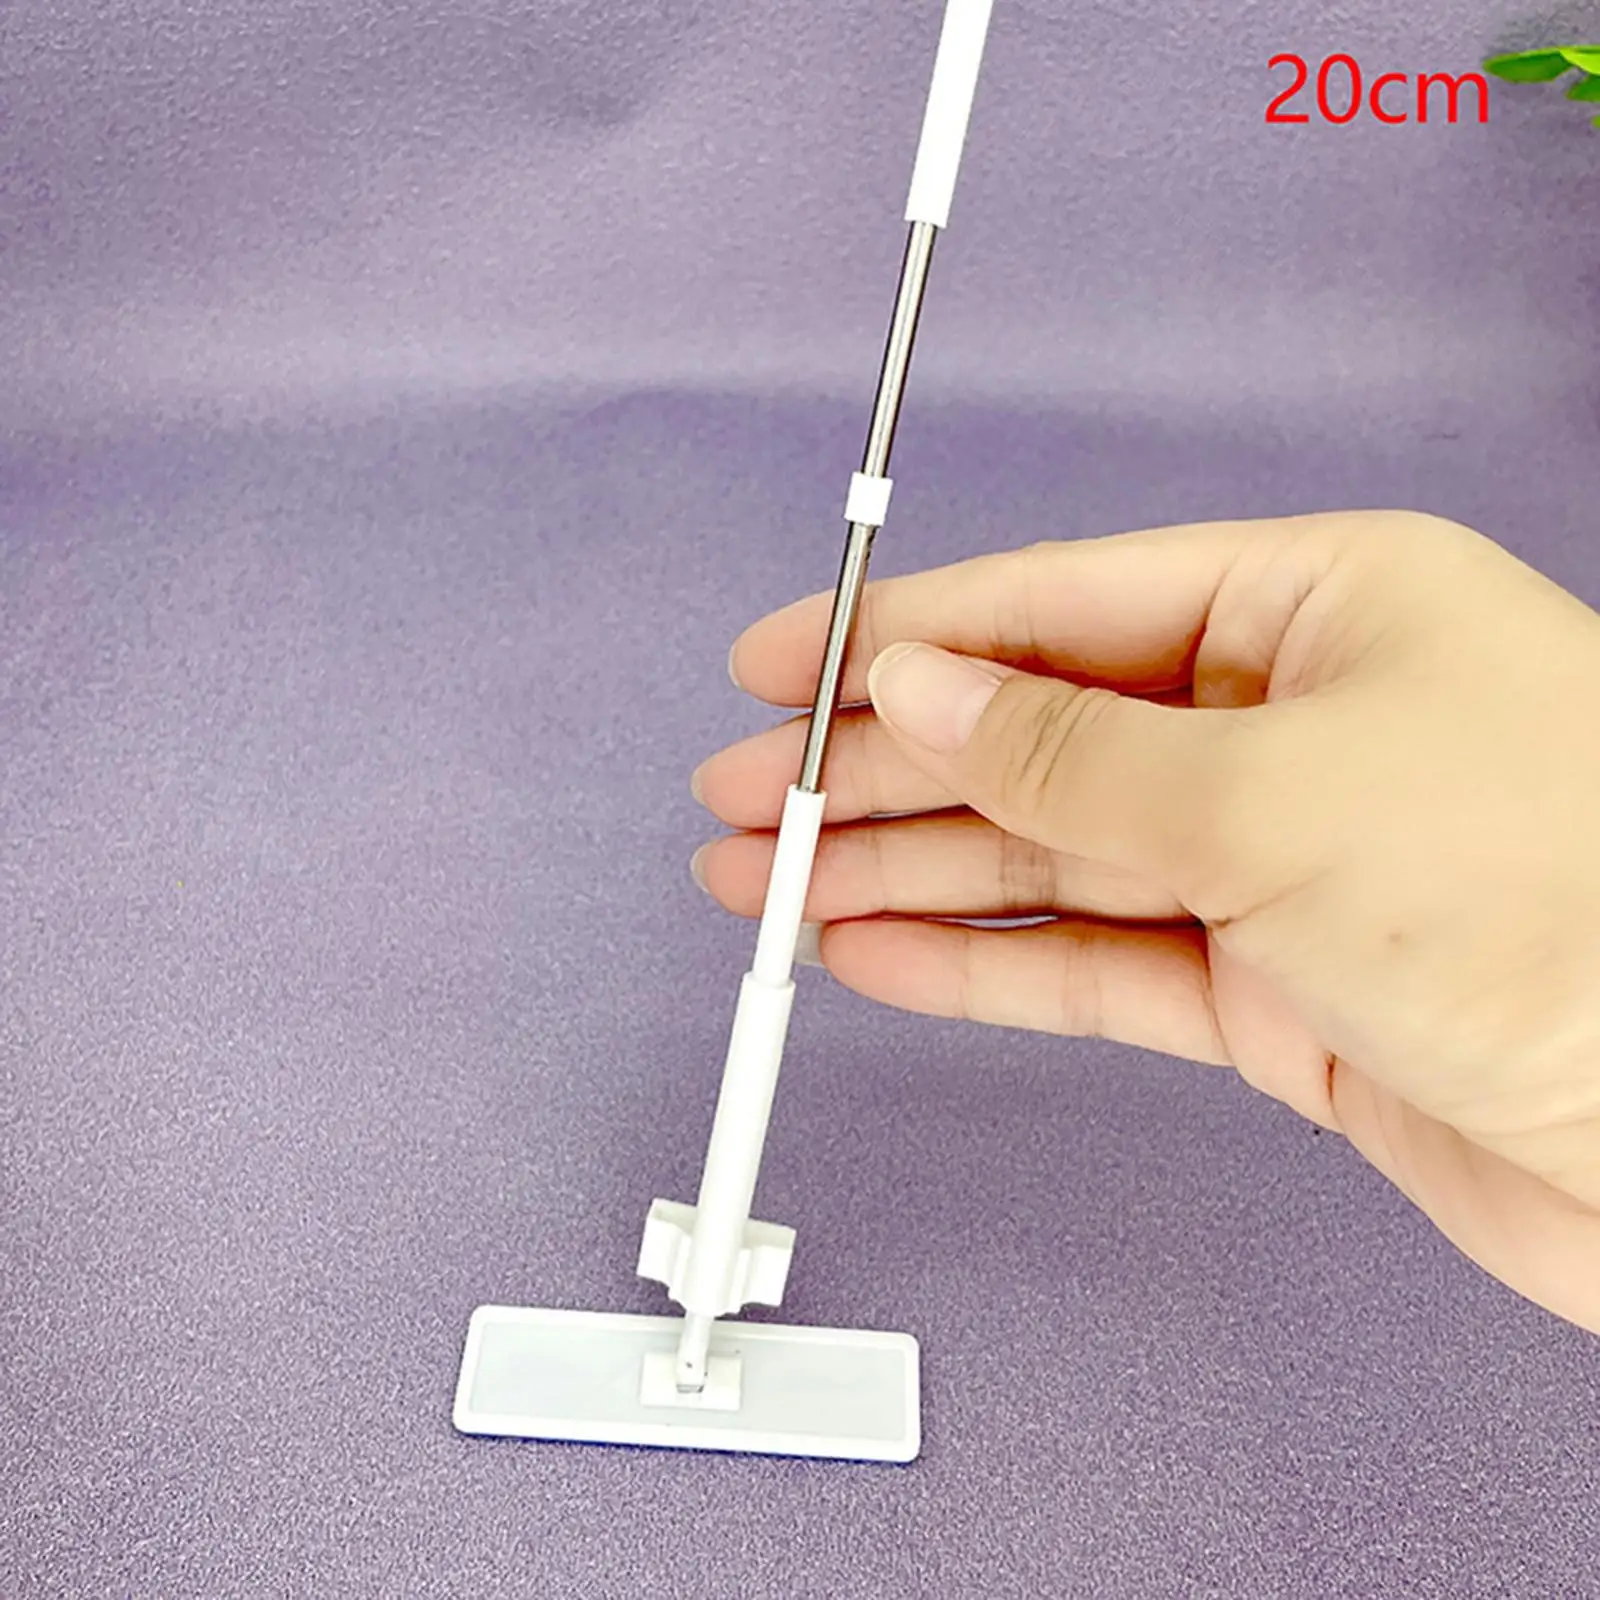 1/12 Mini Cleaning Tool Dollhouse Miniature Mop for Doll House Decors Floor Cleaning Microfiber Mop for Living Room Bathroom